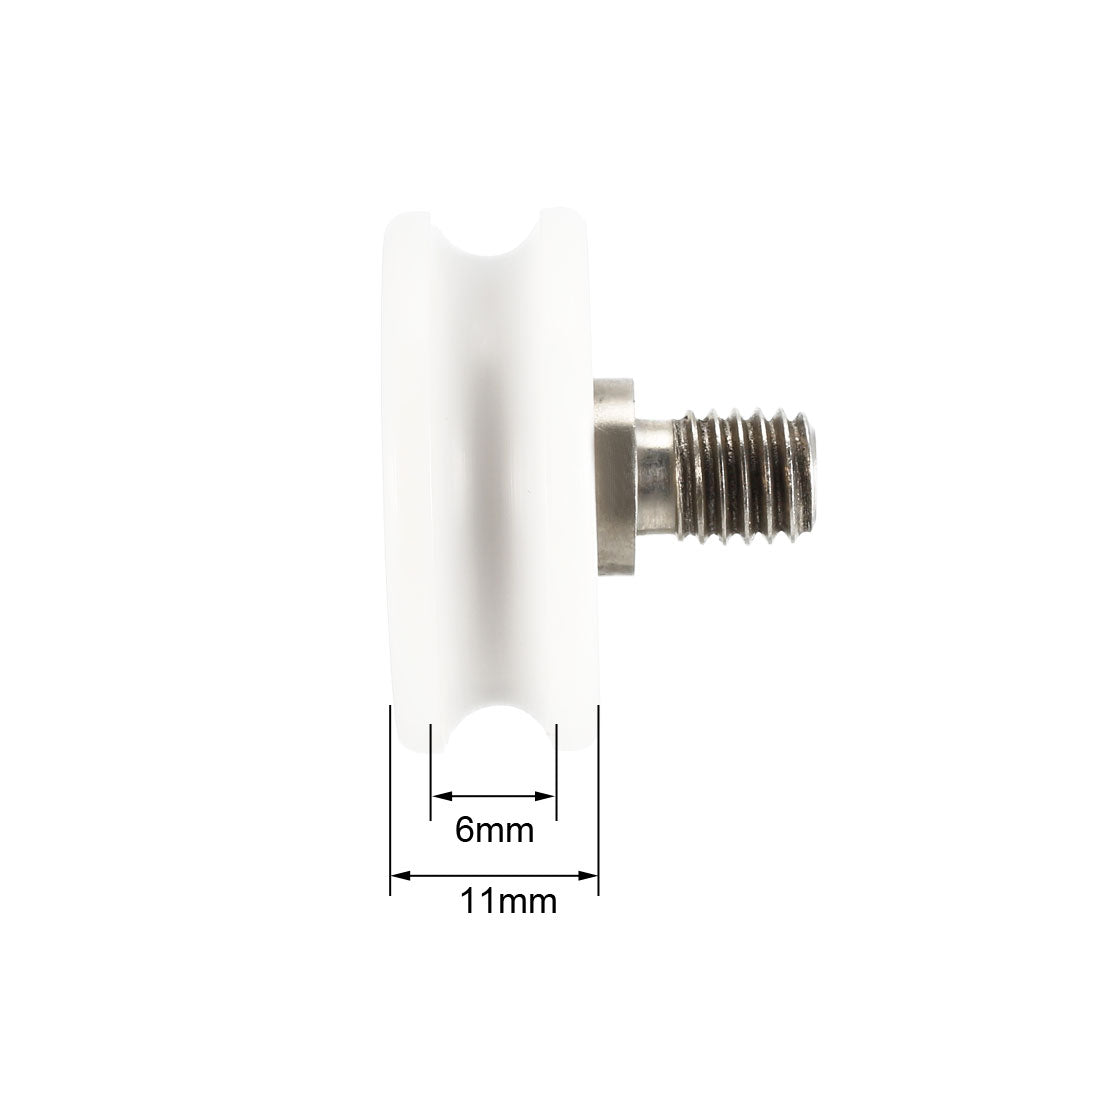 uxcell Uxcell 2.5mm Deep Metal V Groove Threaded Rod Track Guide Bearing Pulley Wheel White 30x11mm 1pcs